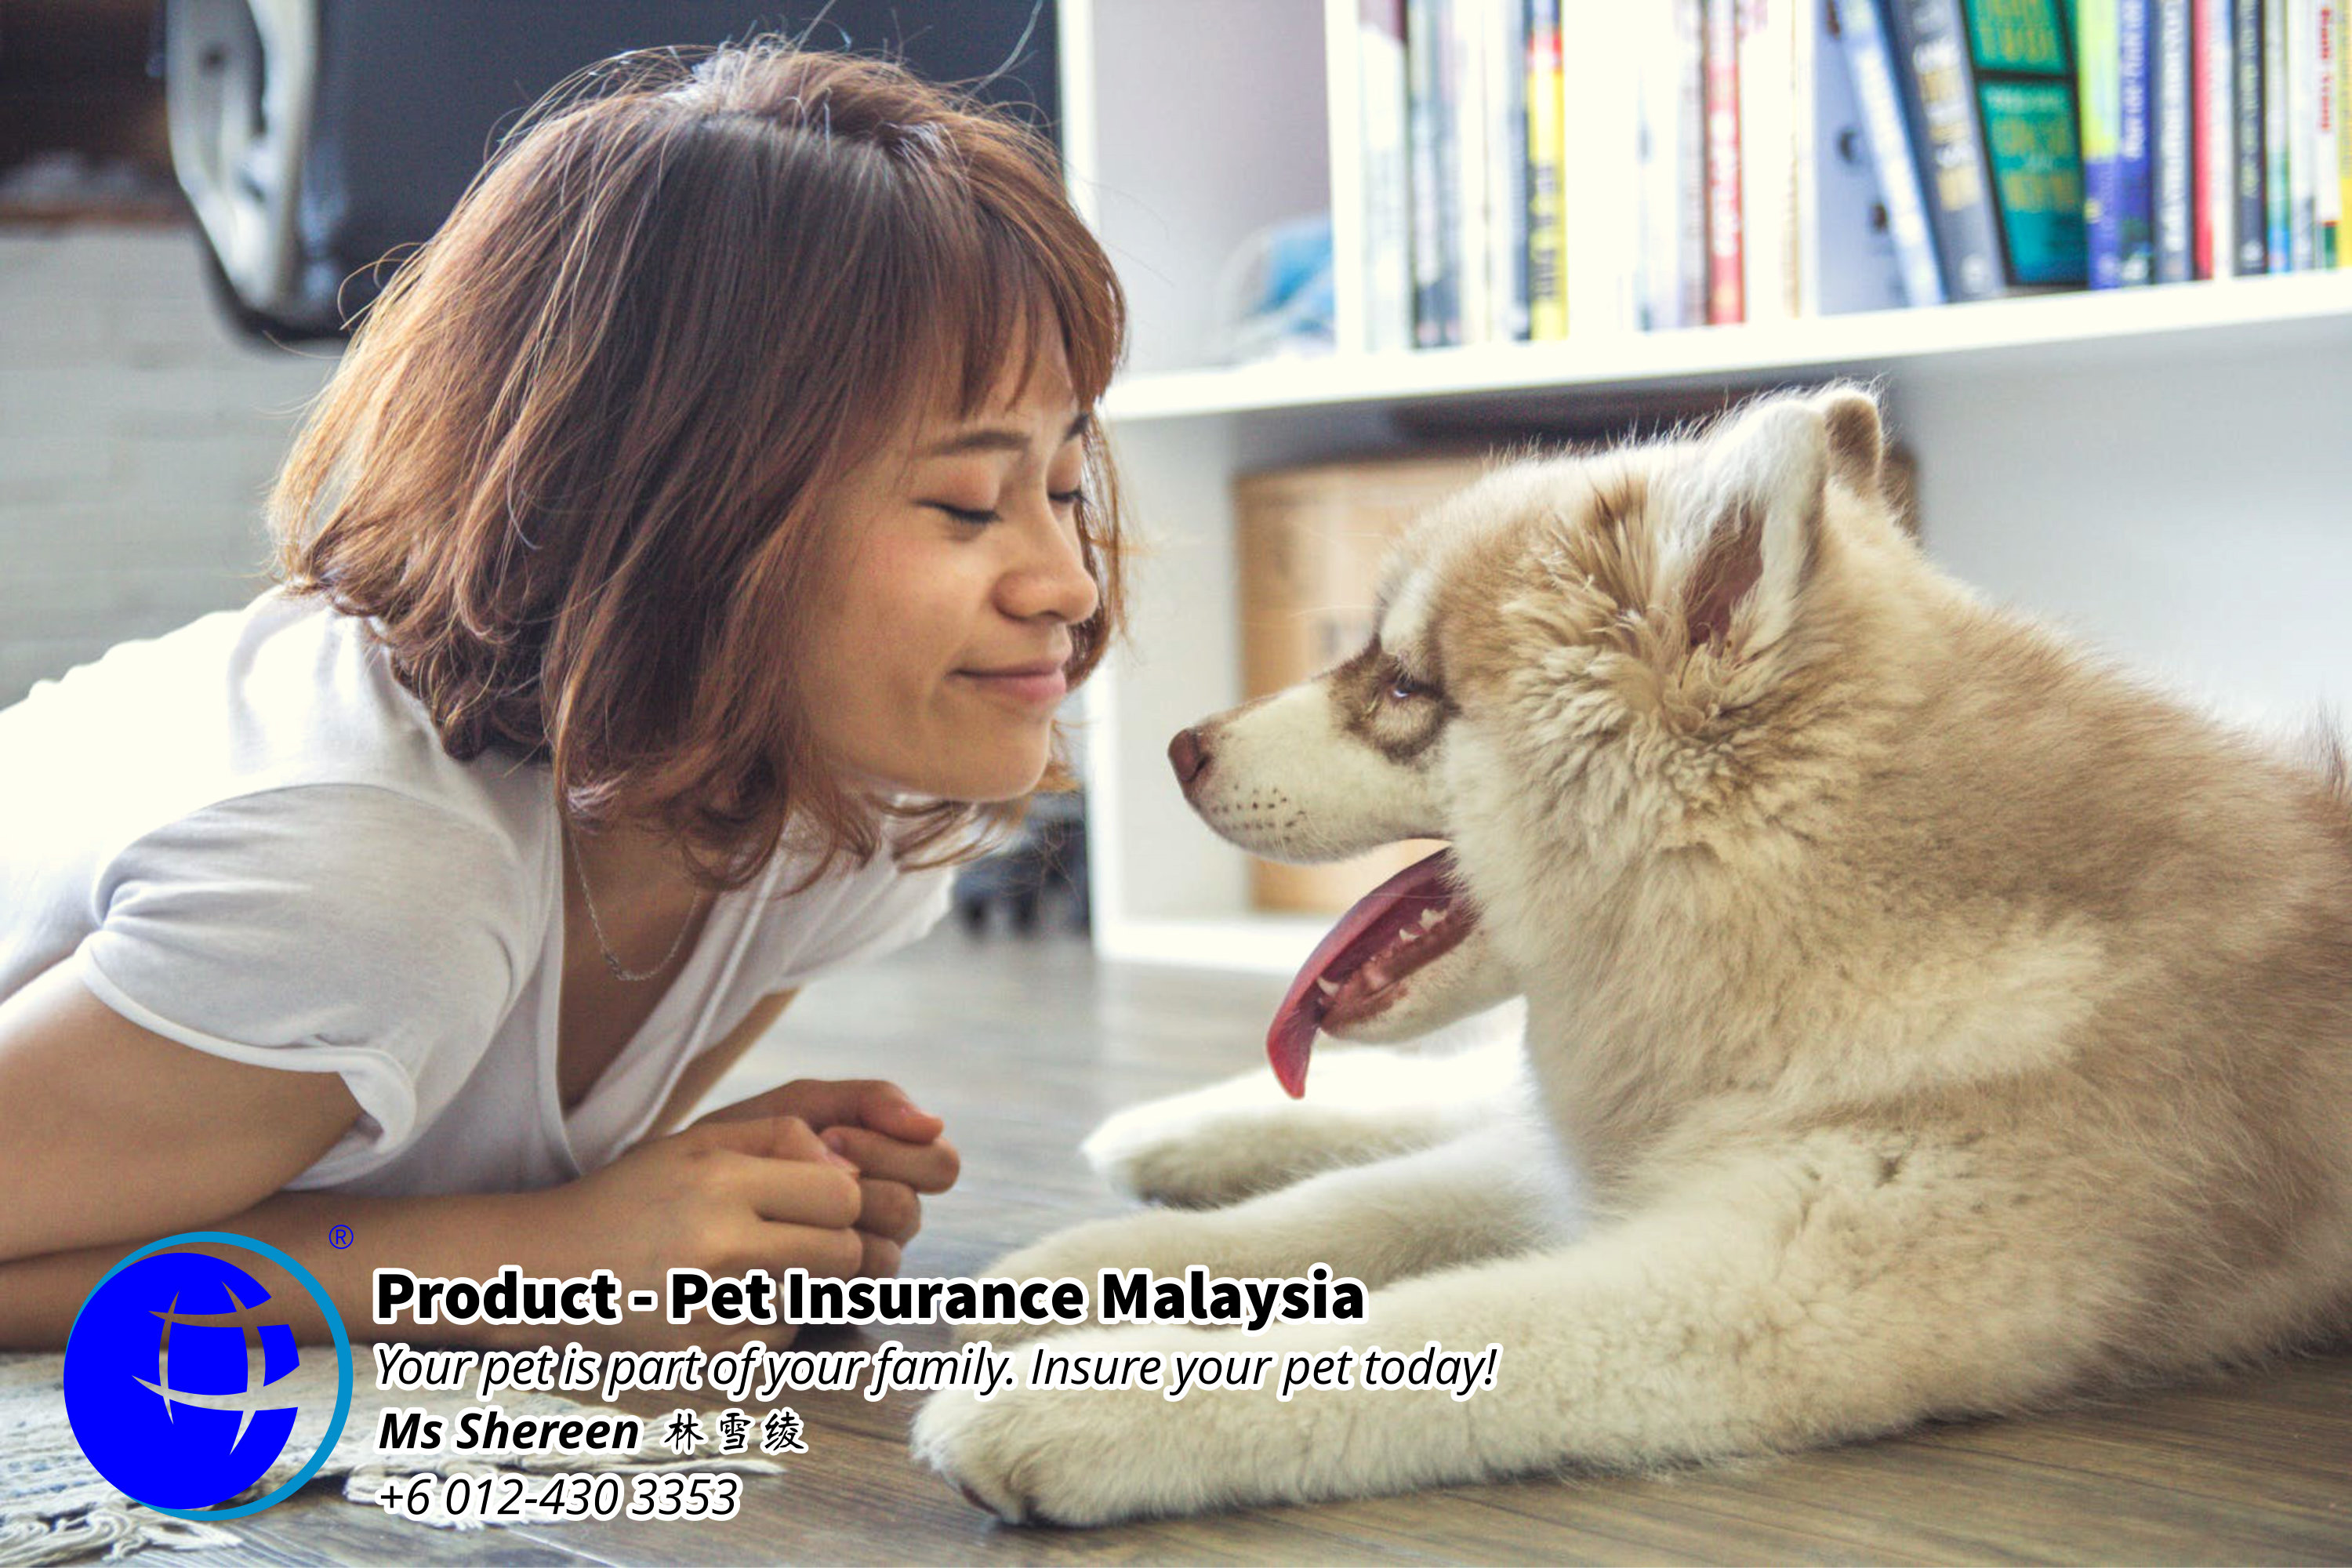 Pet Insurance Malaysia Johor Batu Pahat Agensi Pekerjaan Unilink Prospects SB Wisma V Cat Insurance Malaysia Dog Insurance Malaysia Johor Batu Pahat Your pet is part of your family Insure your pet today A09